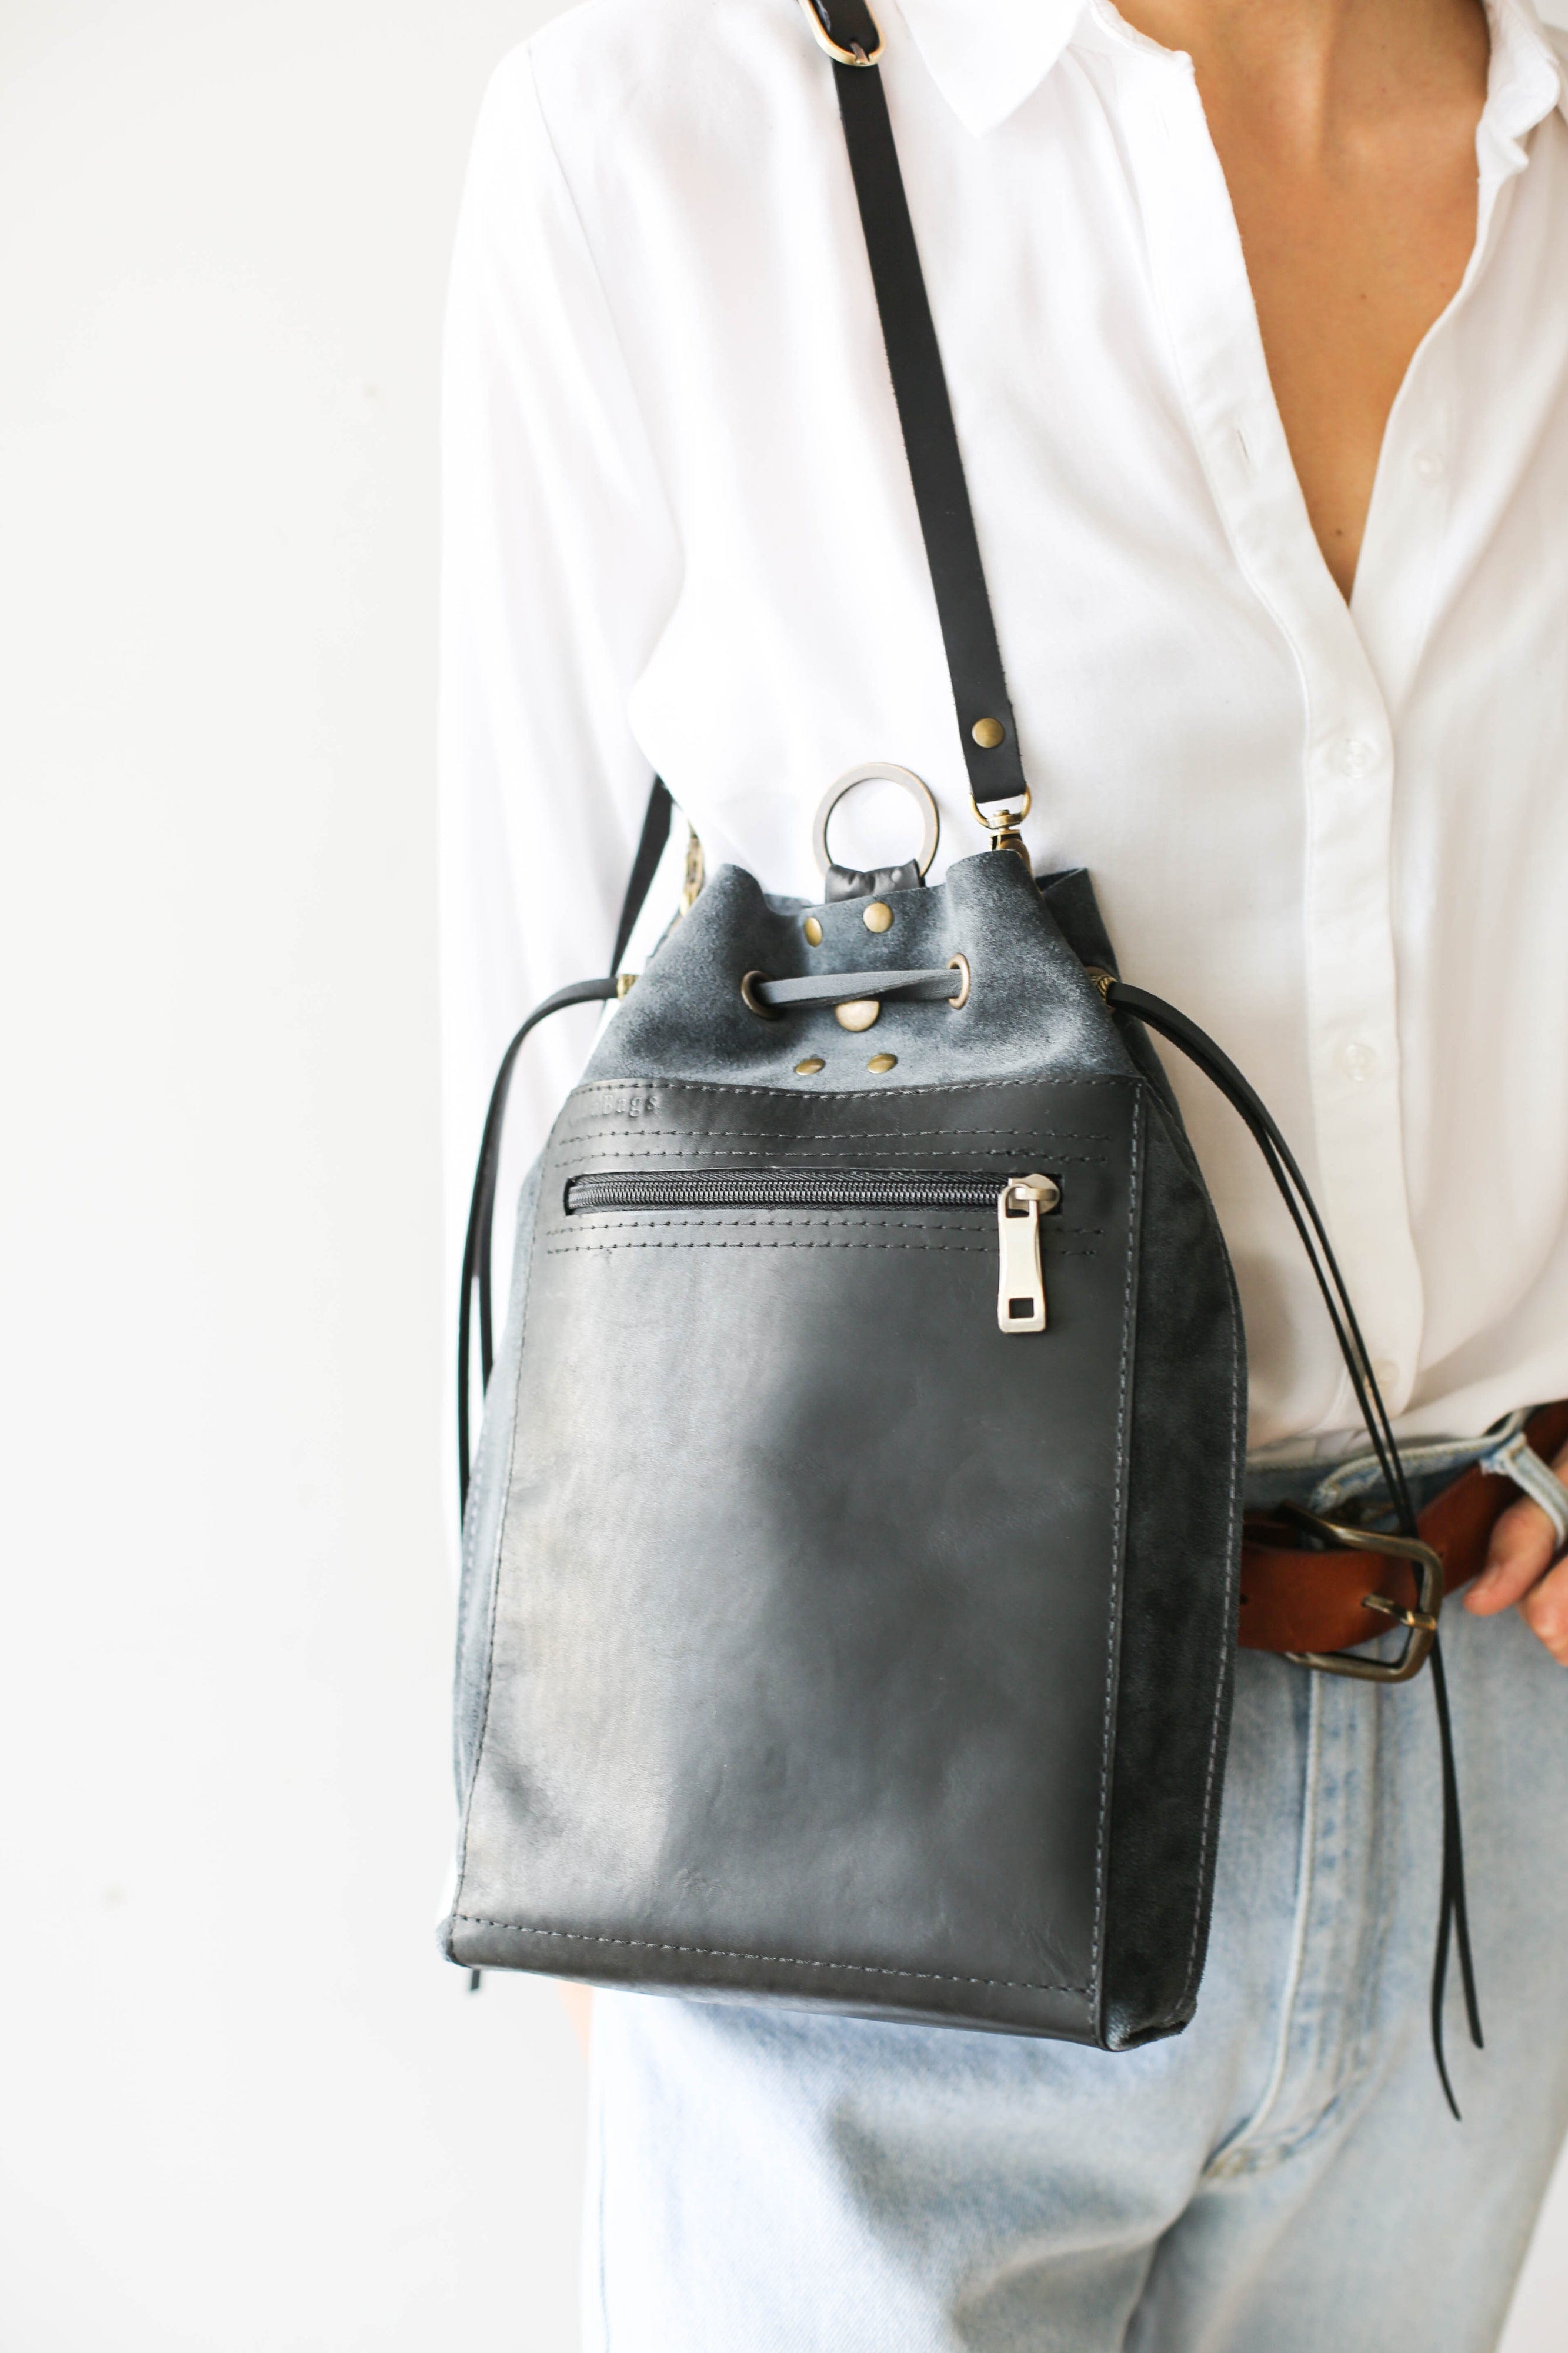 Small Leather Crossbody Bag, Soft Leather Bag, Small Leather Purse, Gray  Leather Bag, Bag for Phone - Etsy | Leather crossbody bag small, Grey  leather bags, Leather crossbody bag